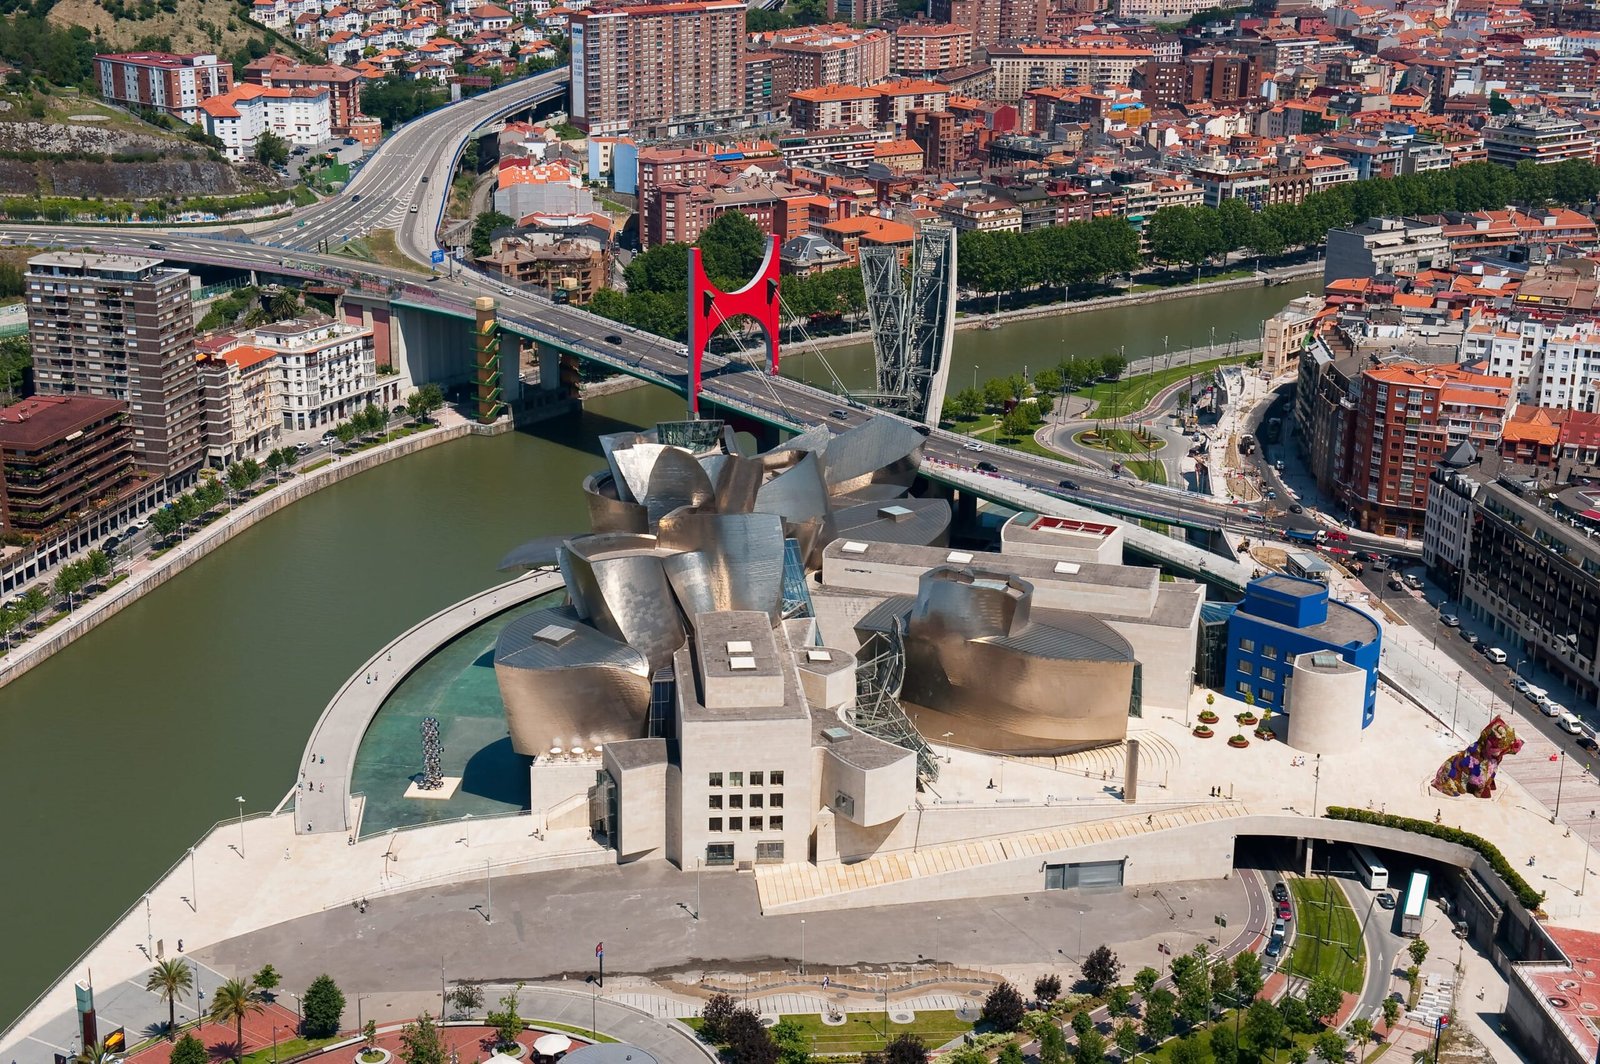 Why is the Guggenheim Museum Bilbao famous